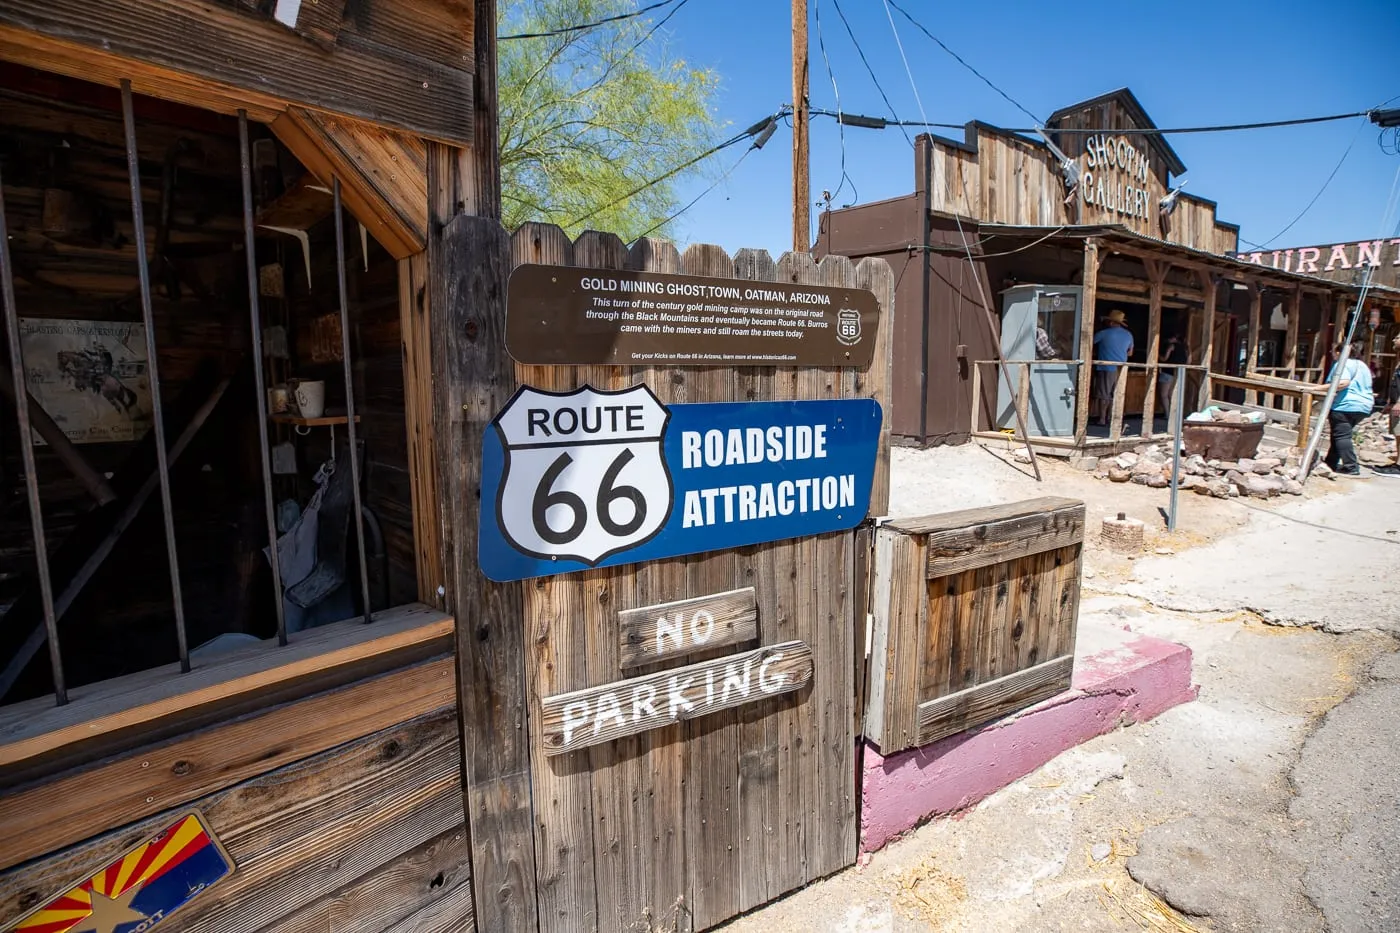 Oatman, Arizona: Burros, Gunfights, and Ghost Towns Roadside Attraction